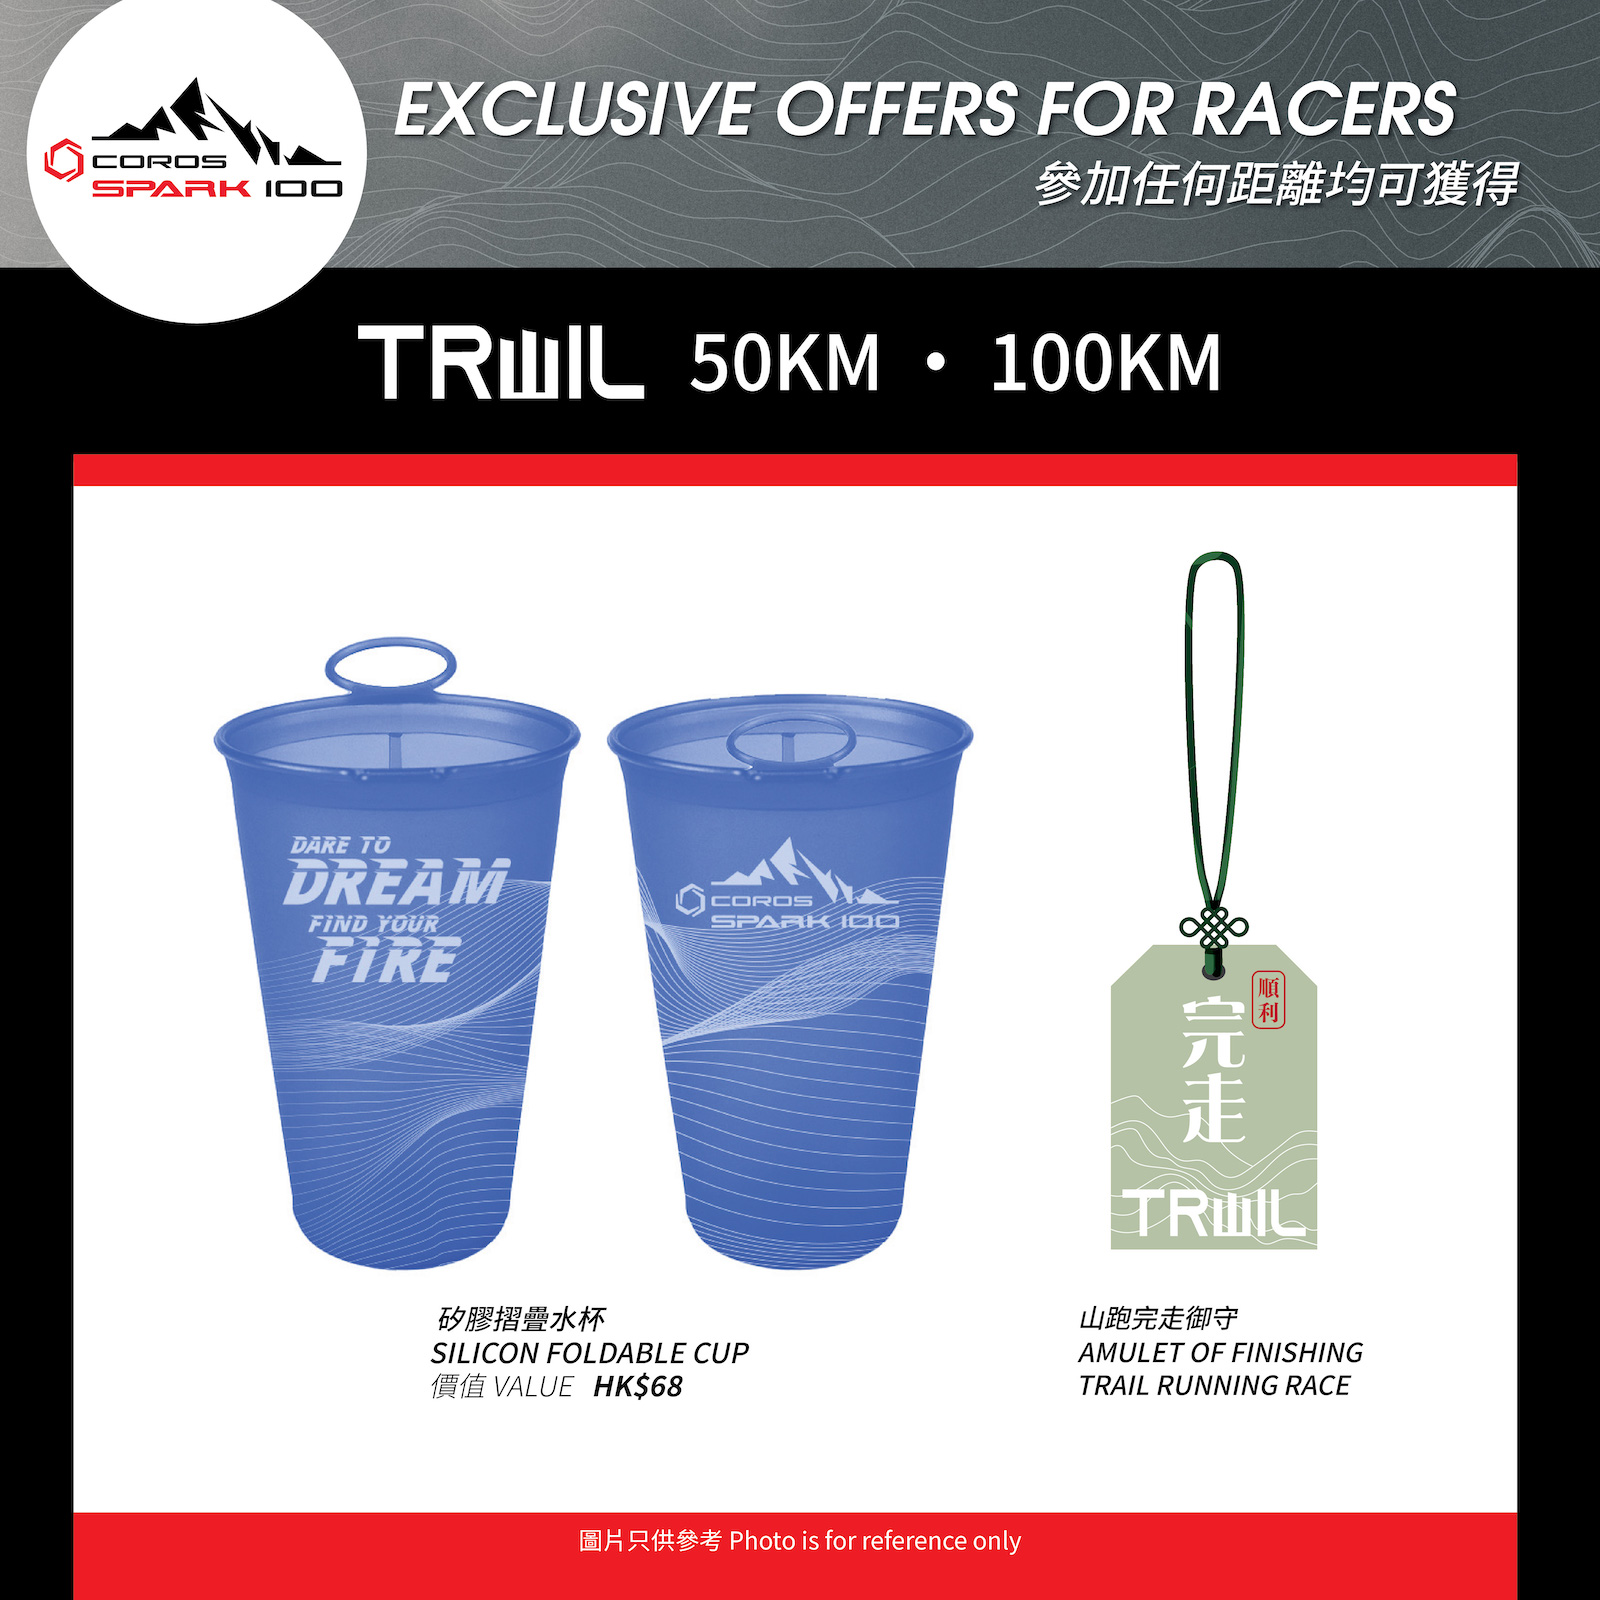 COROS SPARK 100 silicone foldable cup (Value: HK$68) &  Amulet of trail race finishing